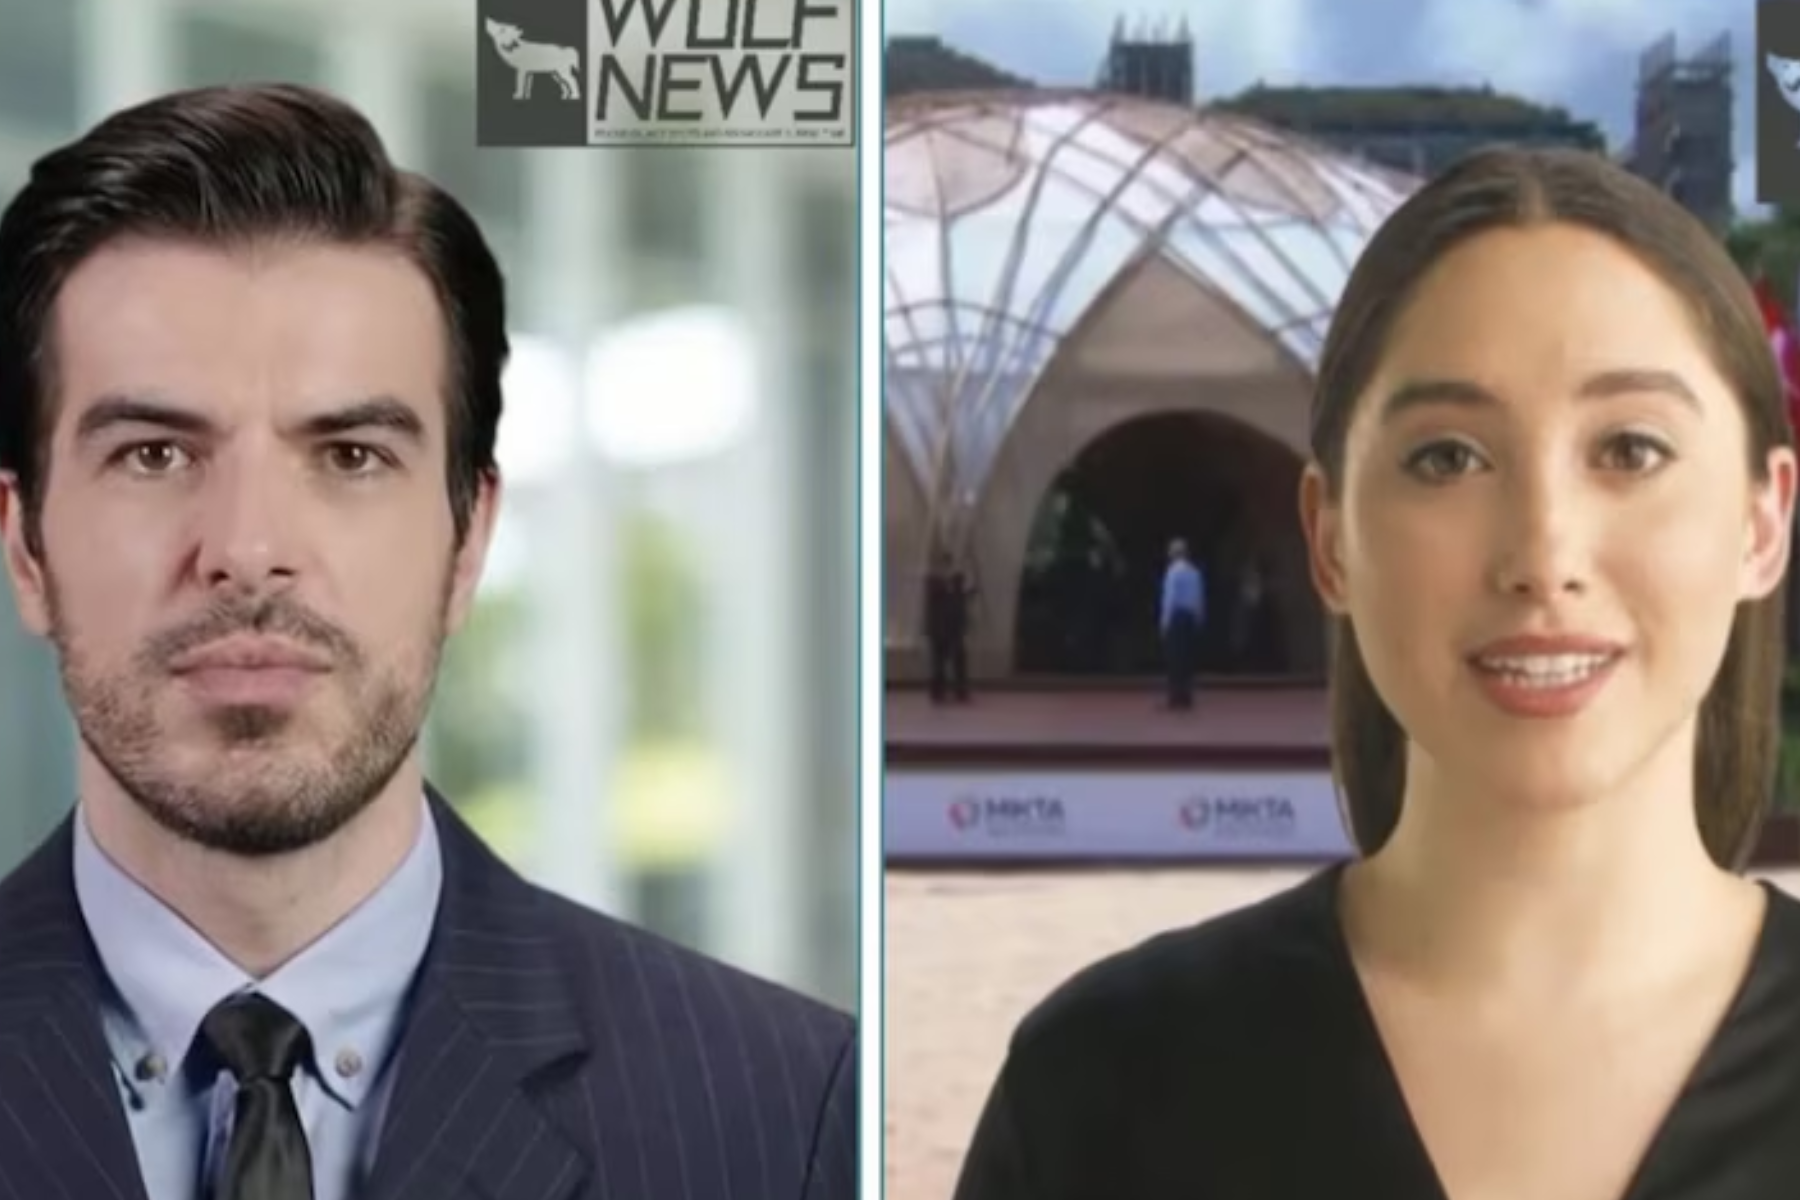 Deepfake 'News Anchors' Appear In Pro-China Footage On Social Media, Research Group Says